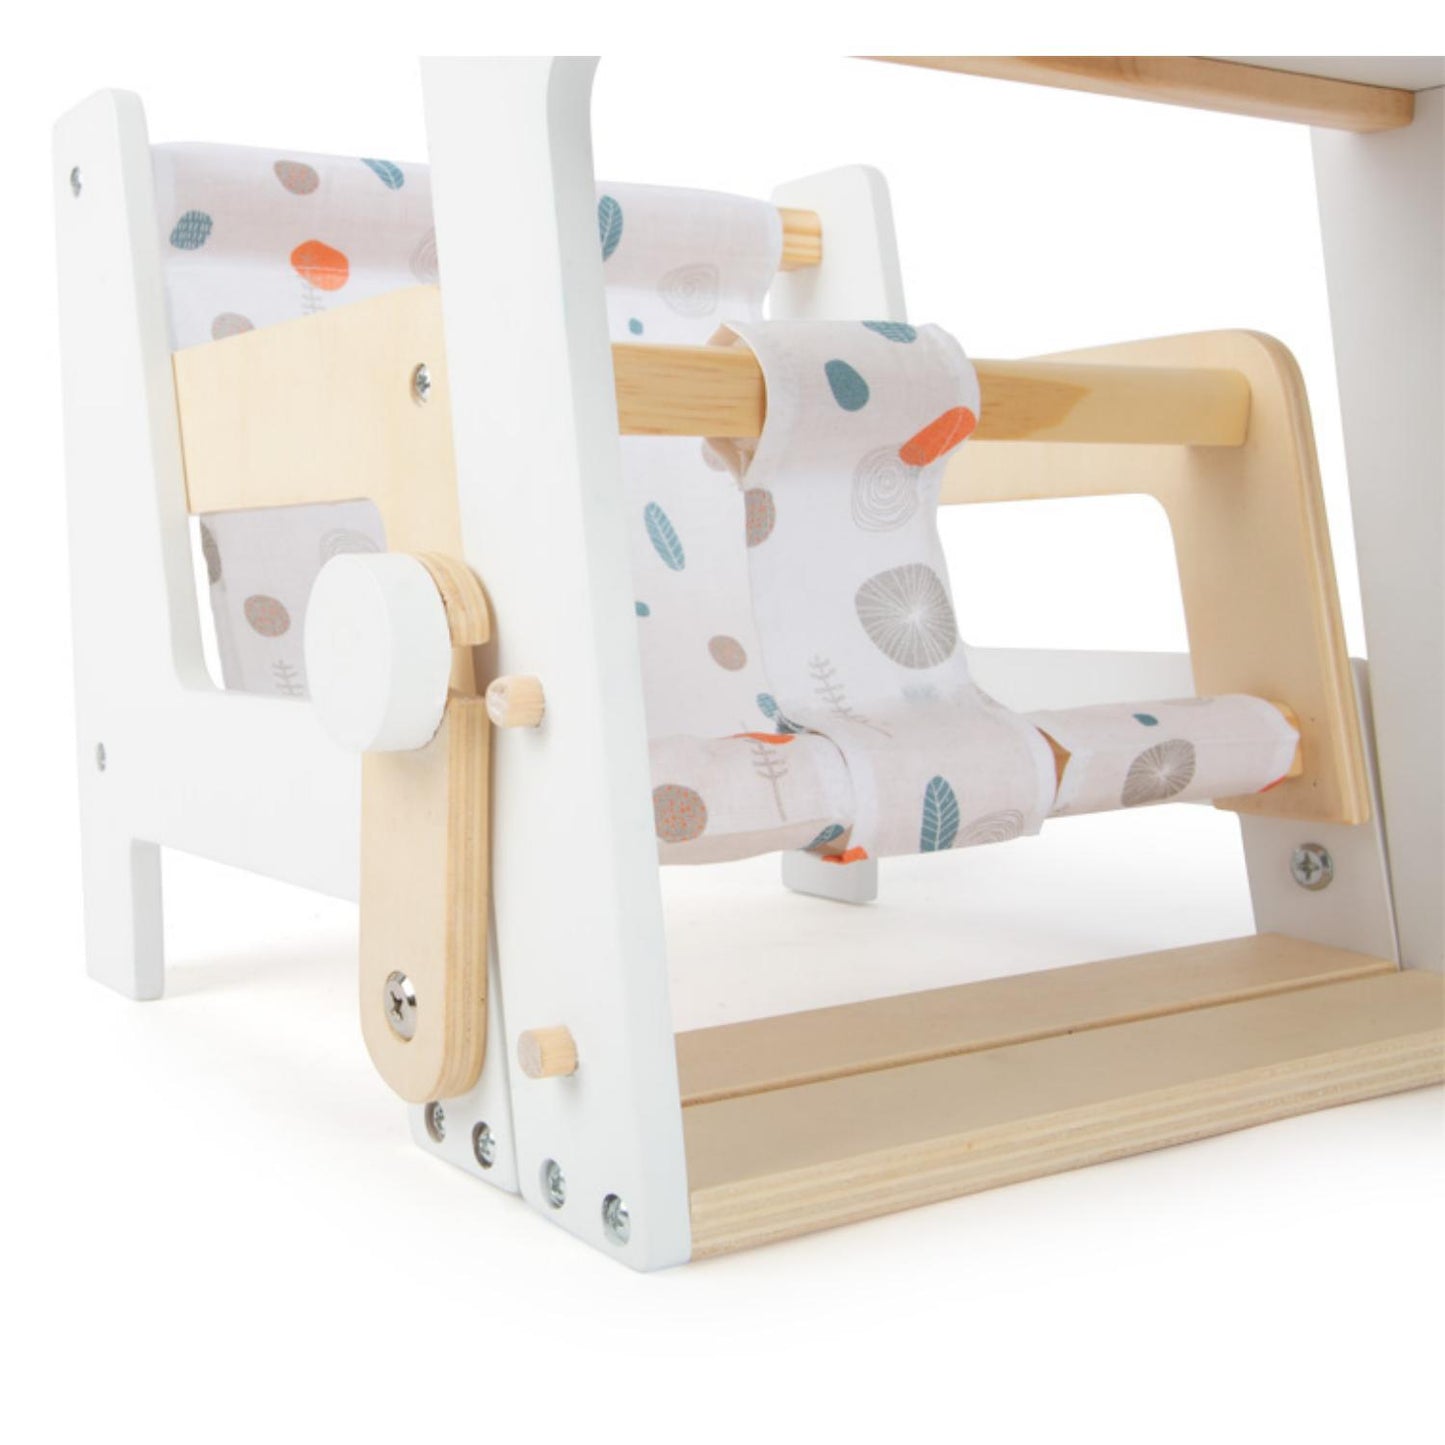 Doll 2-in-1 High Chair | Wooden Pretend Play Toy for Kids